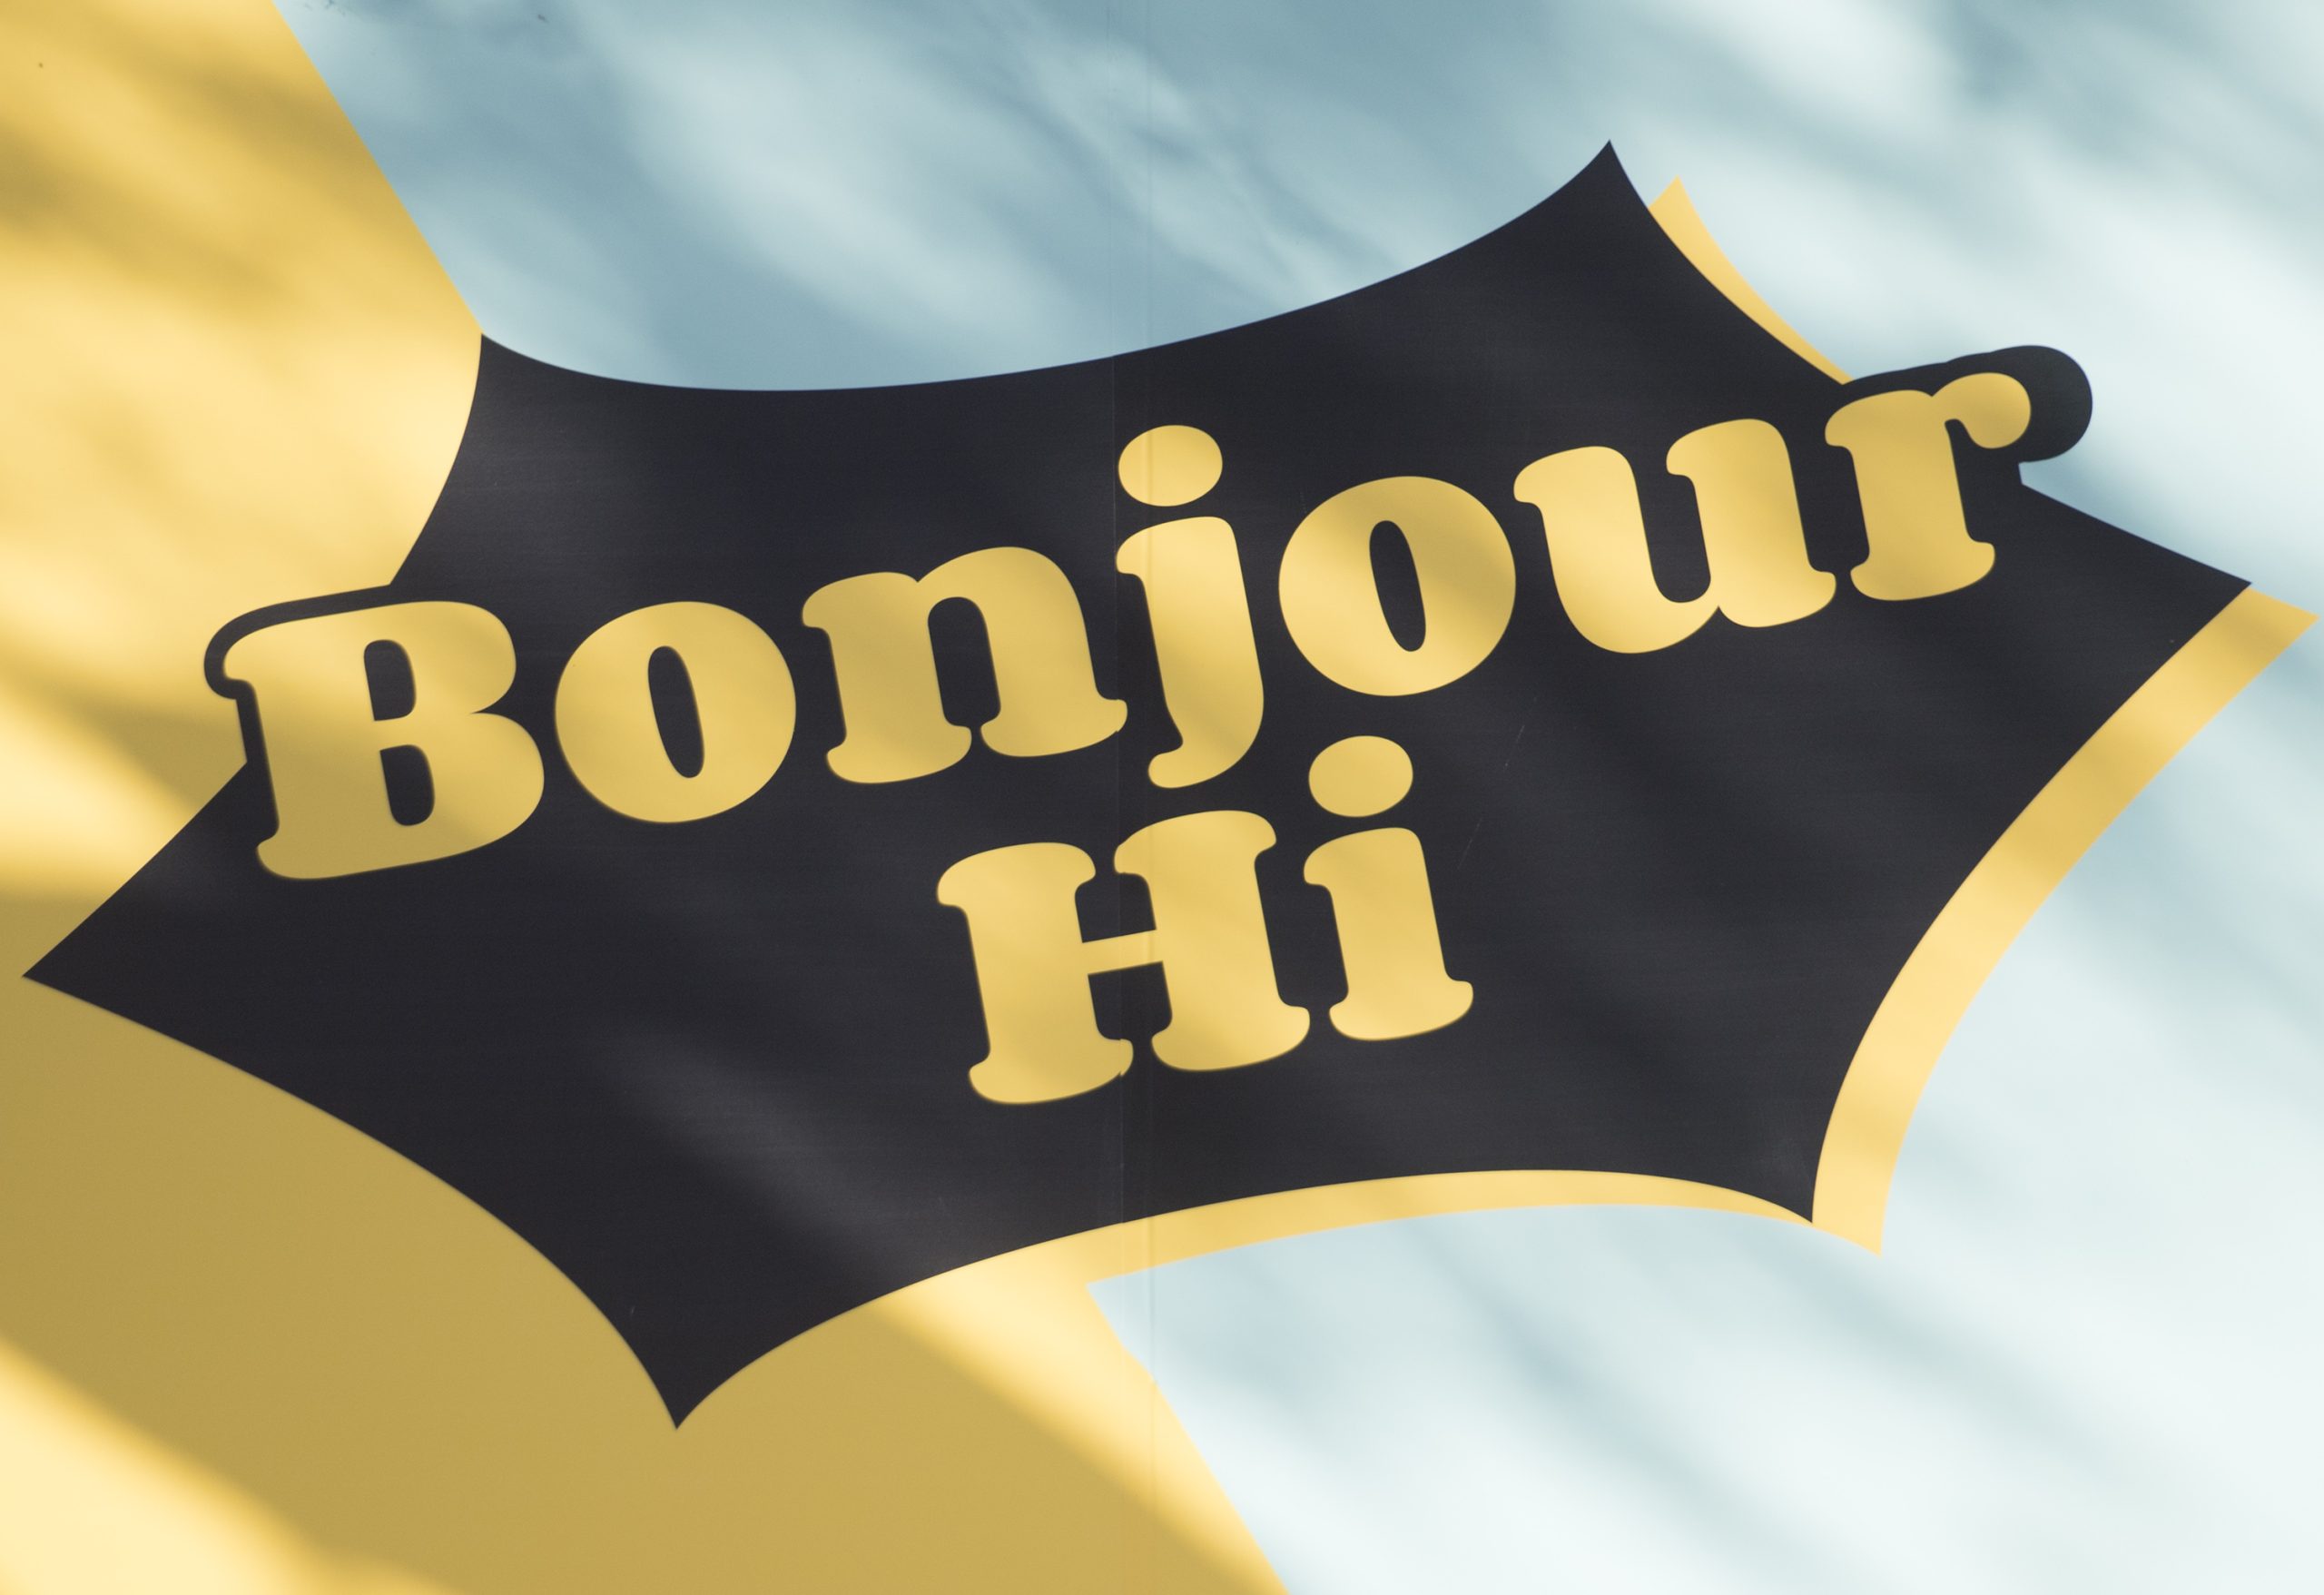 SAQ employees cannot use “Bonjour-Hi” to greet customers